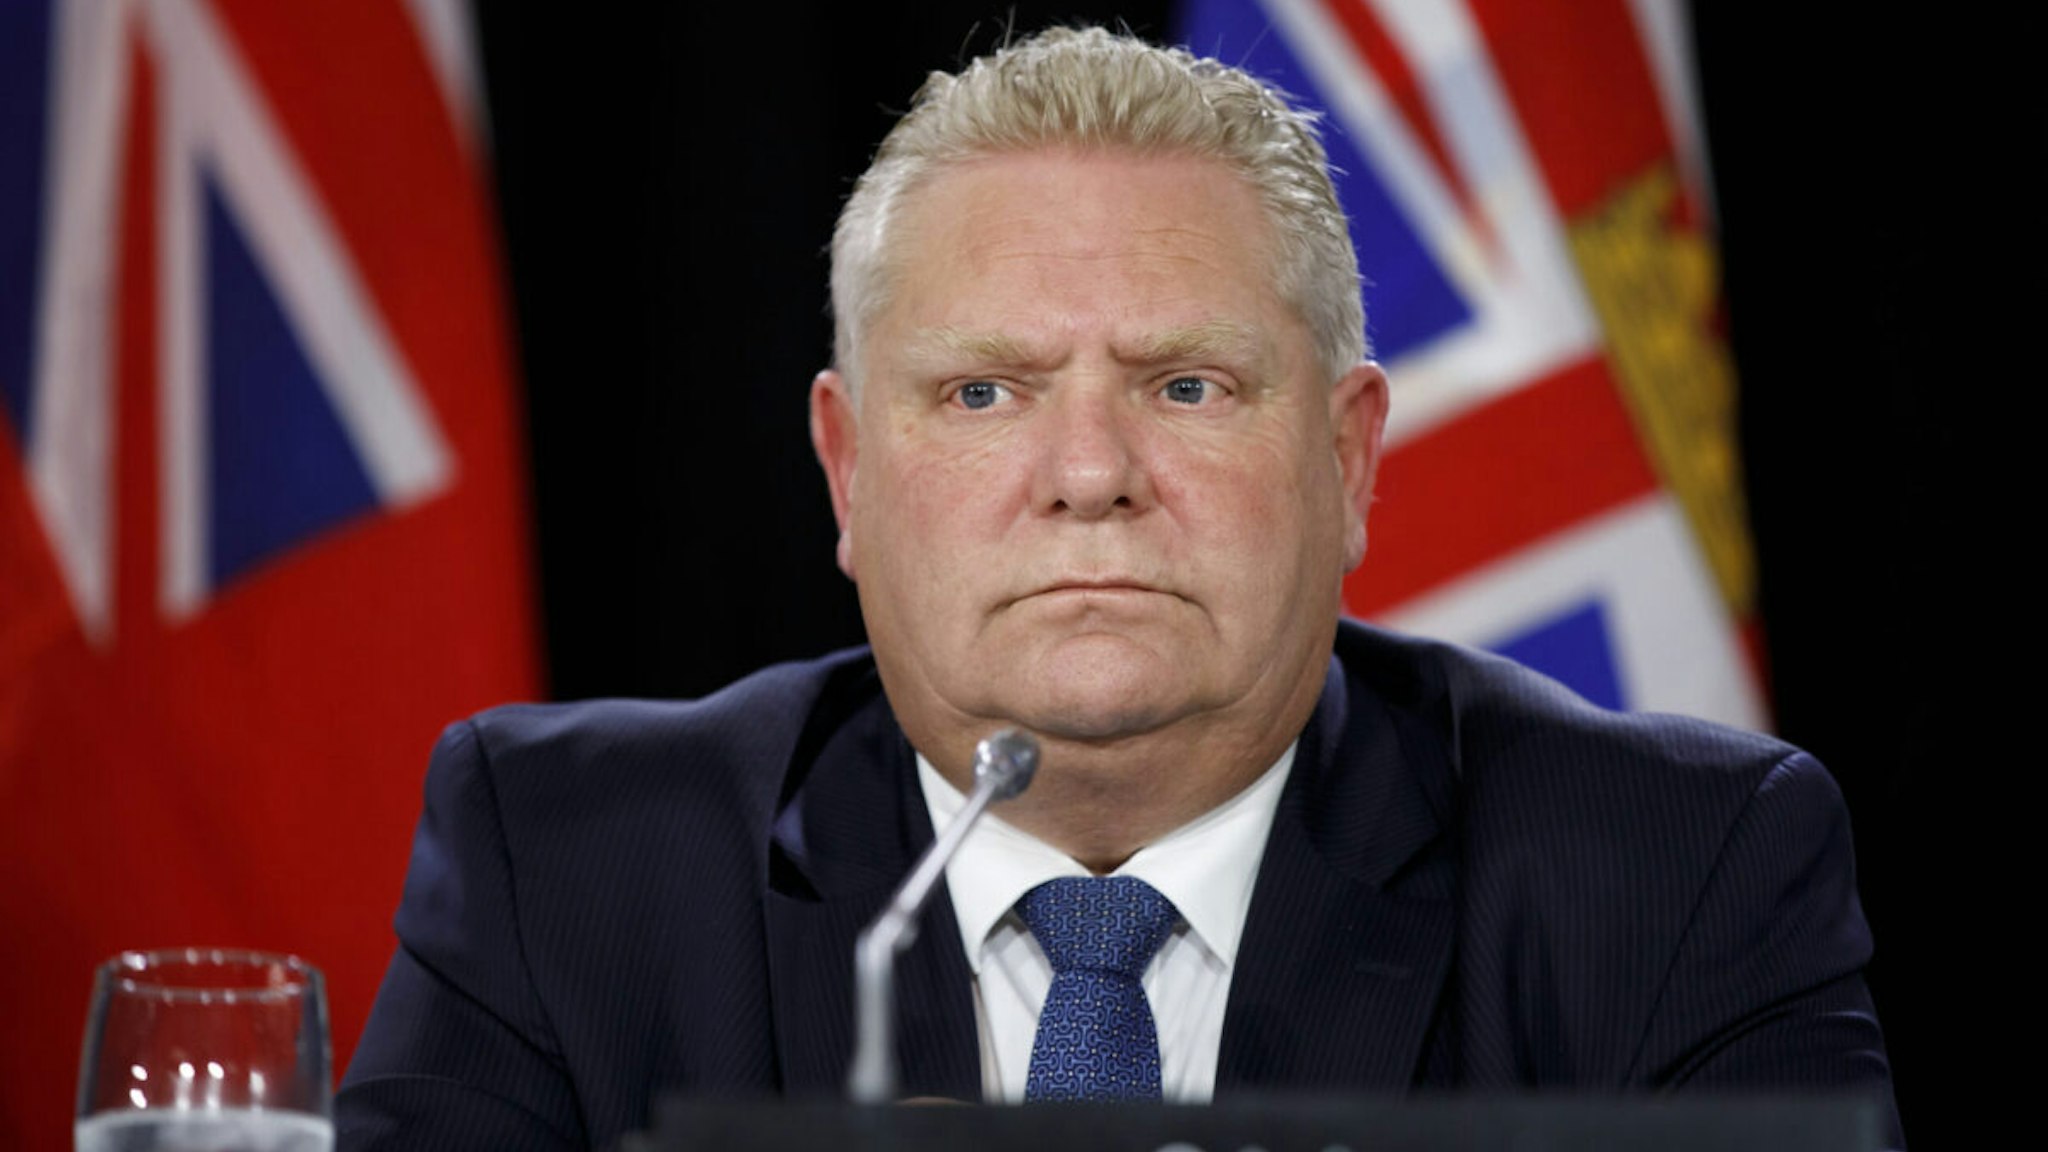 Doug Ford, Ontario's premier, listens during a news conference following the Canada's Premiers meeting in Toronto, Ontario, Canada, on Monday, Dec. 2, 2019.